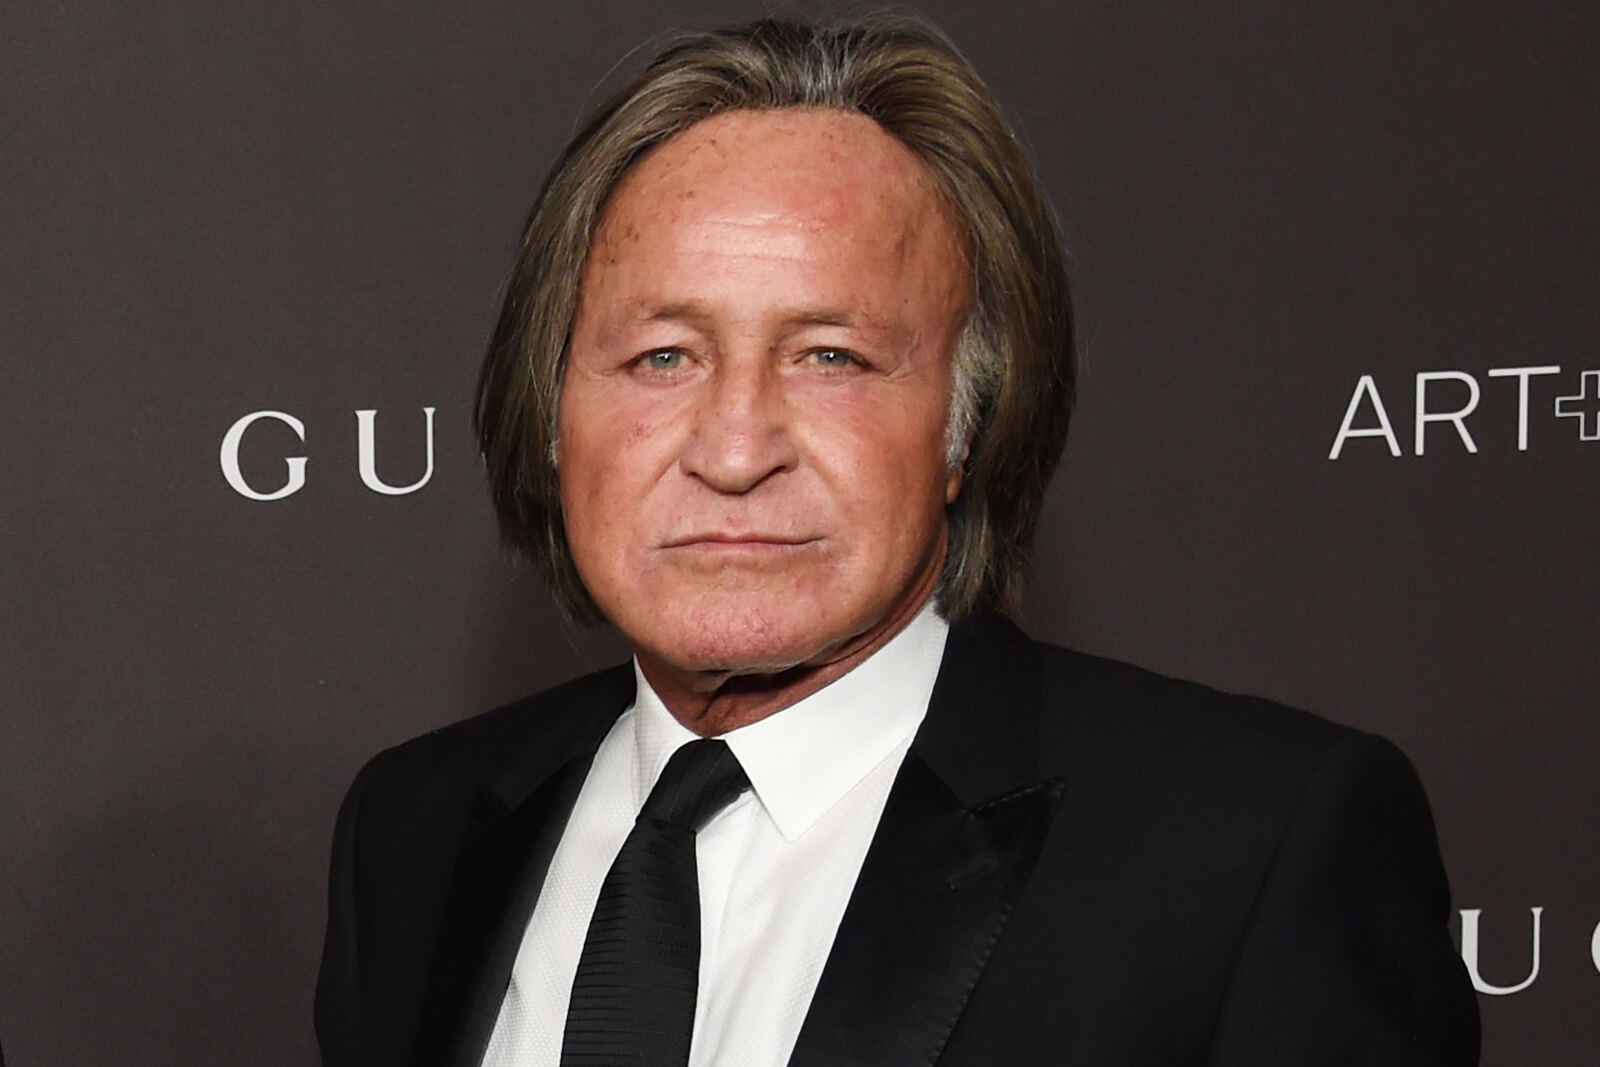 Mohamed Hadid Owes $1.2 Million in Back Taxes on Bel Air Mansion!